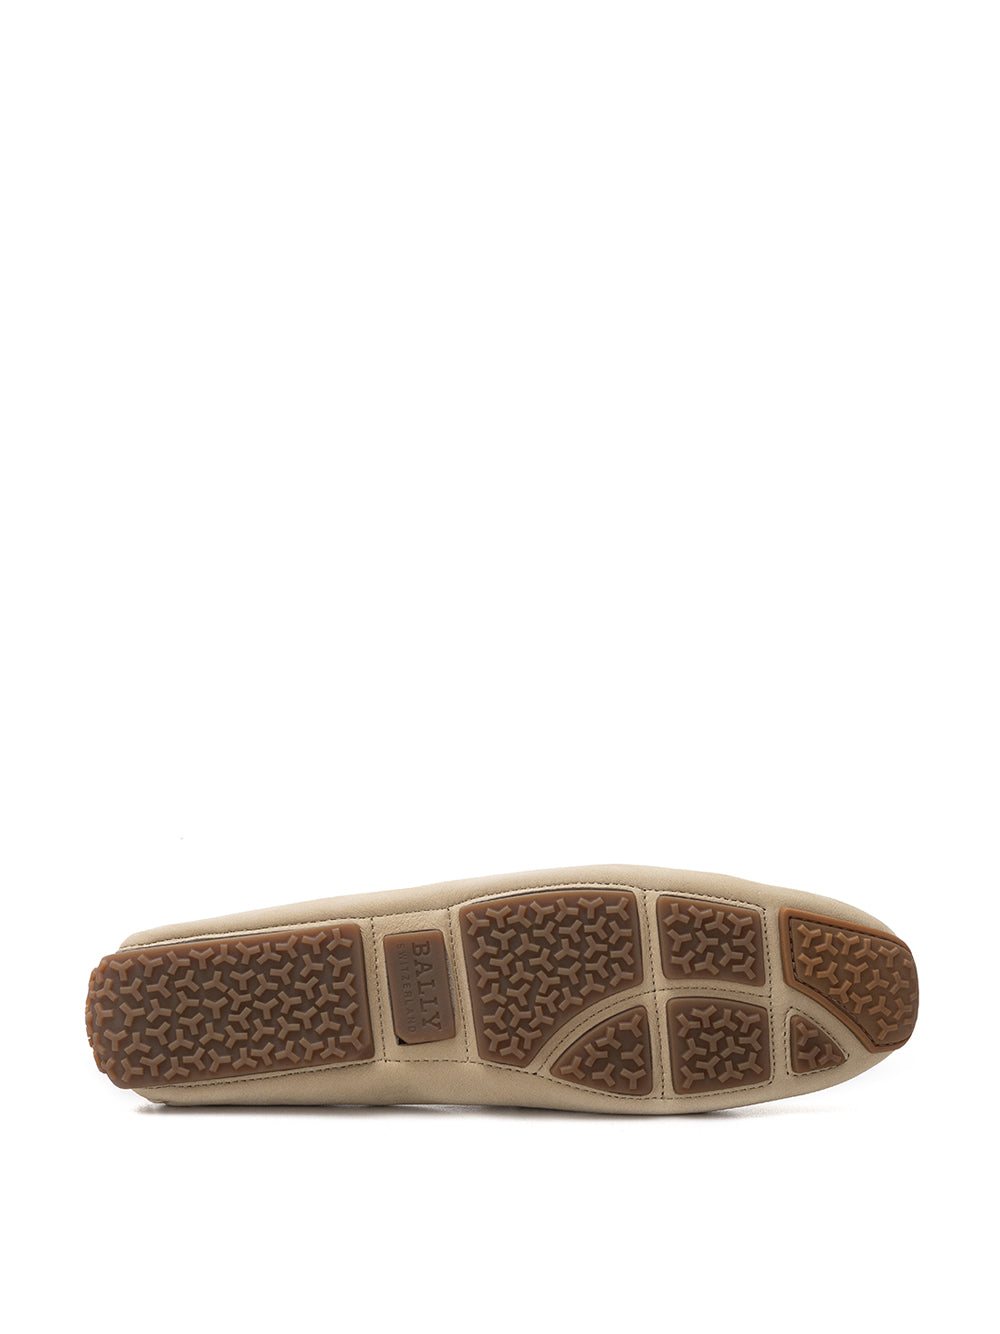 Penny moccasin in Bally beige suede